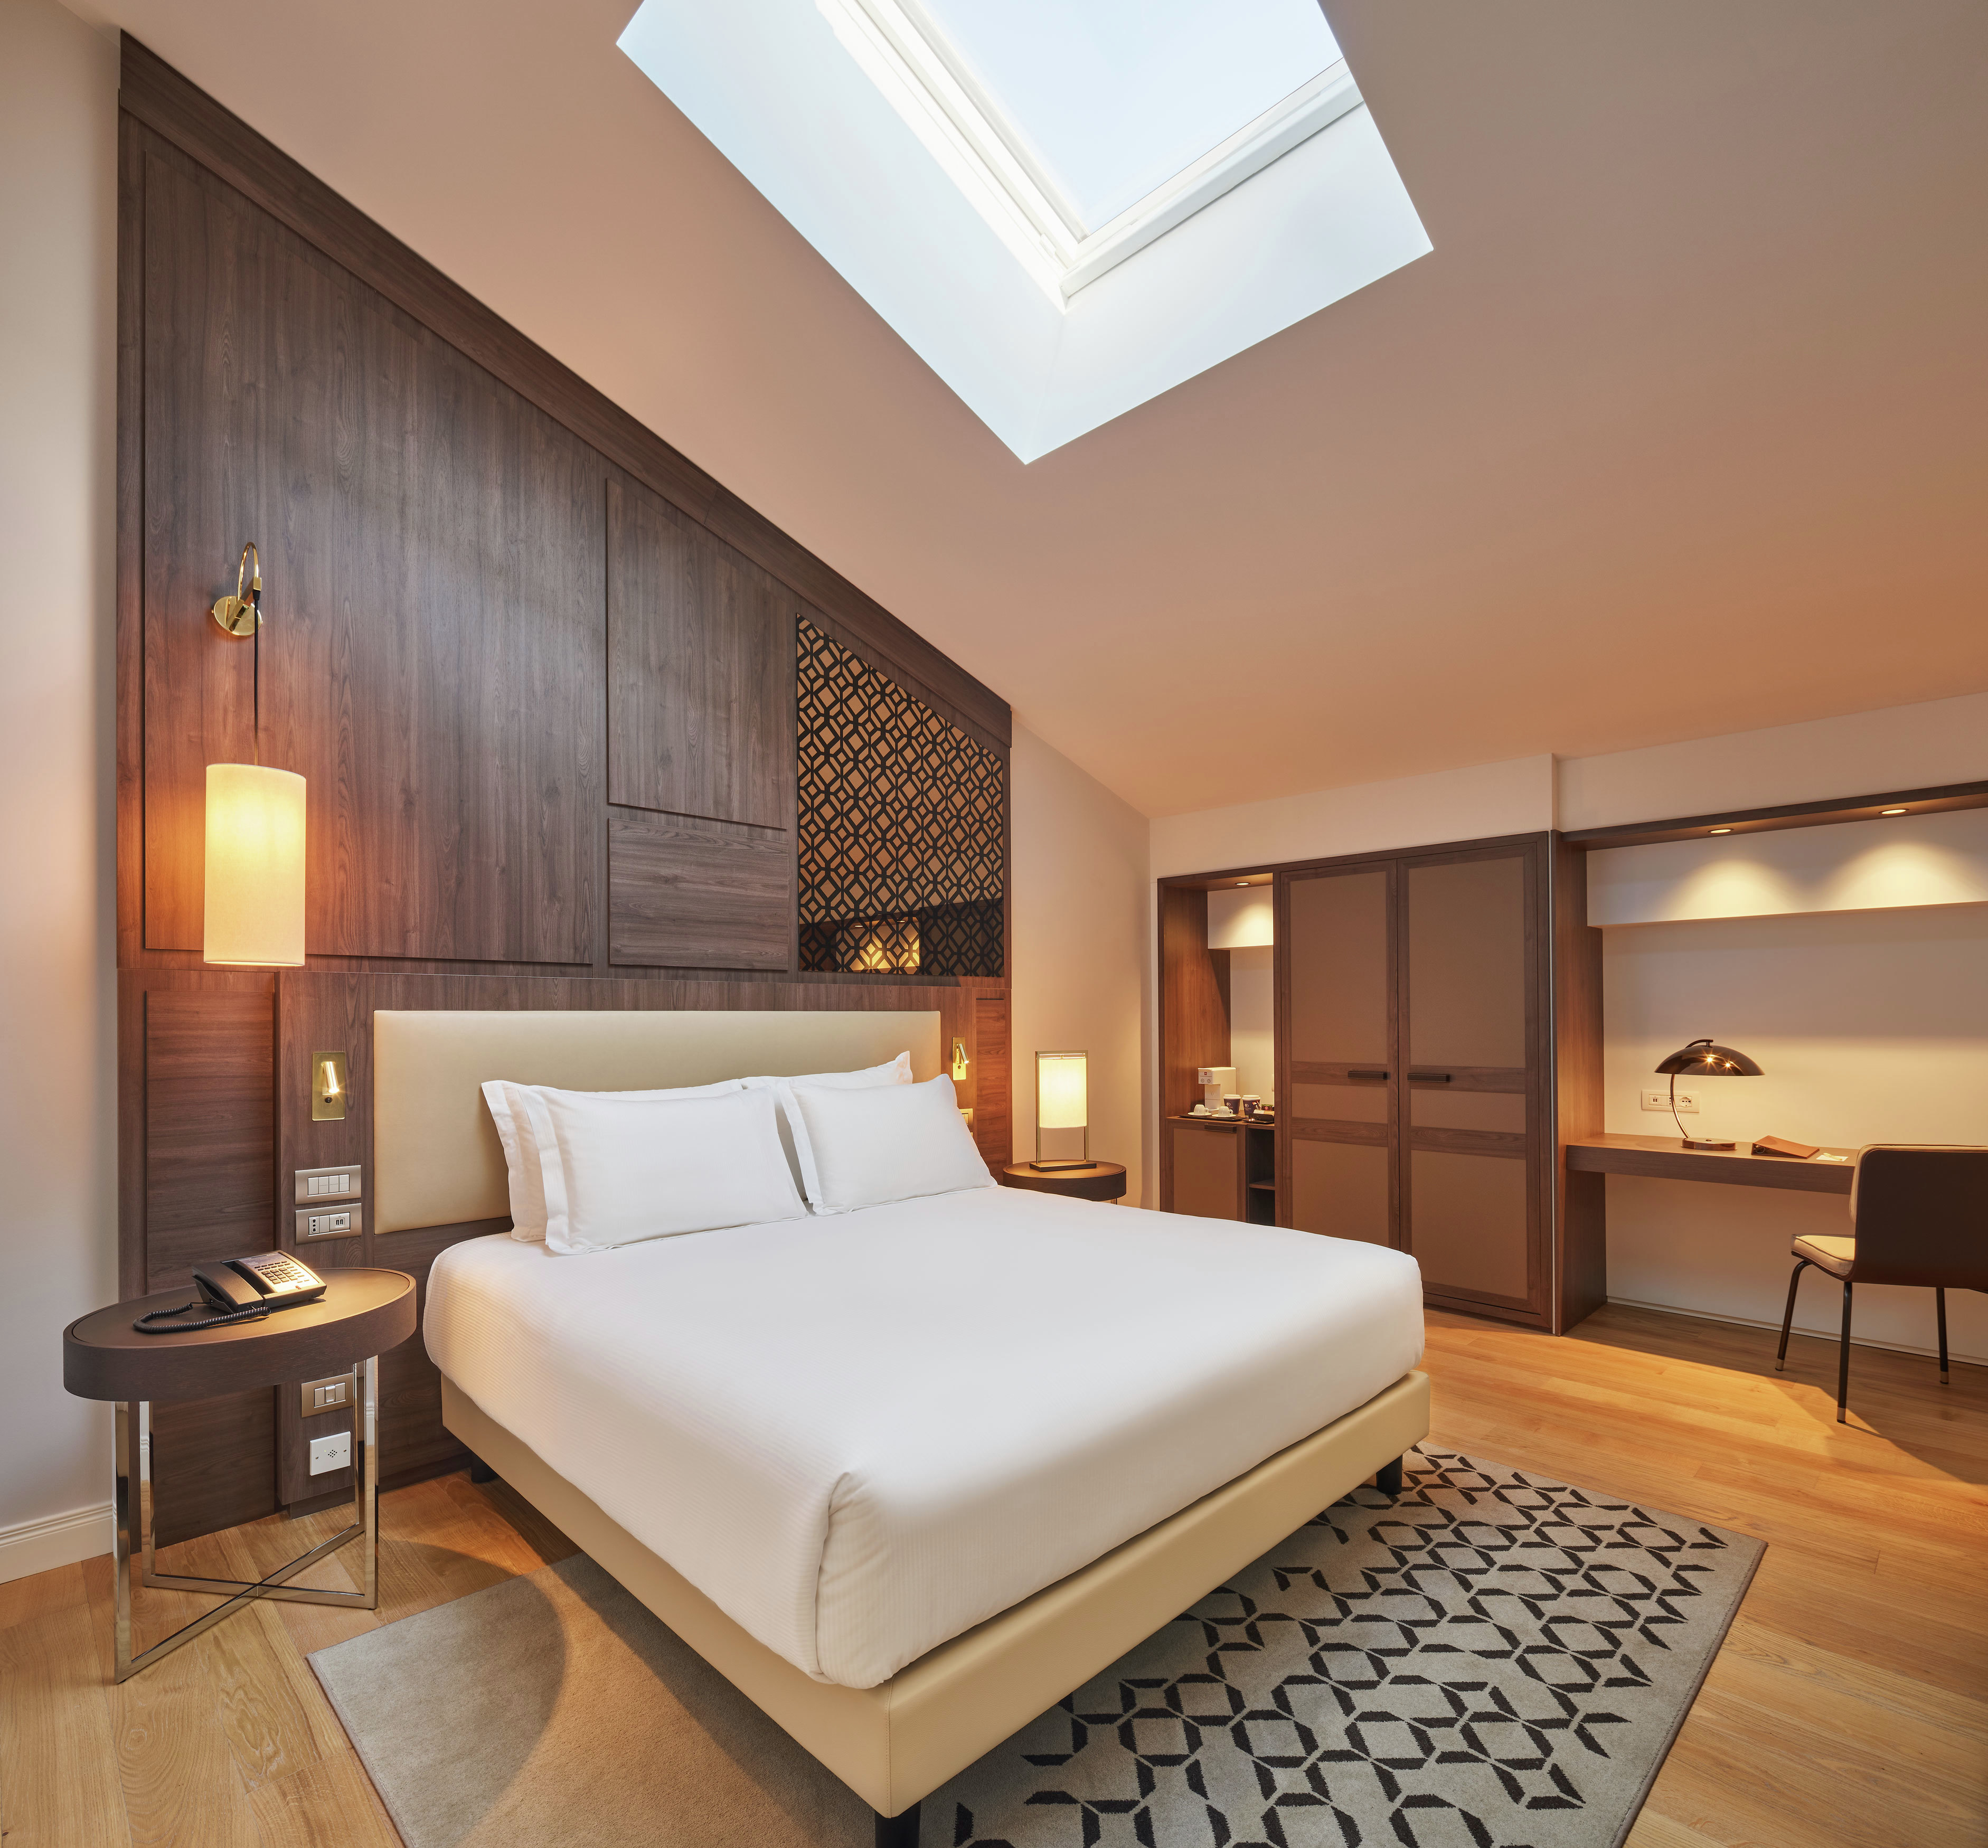 a bed in a room with vaulted ceiling and a skylight